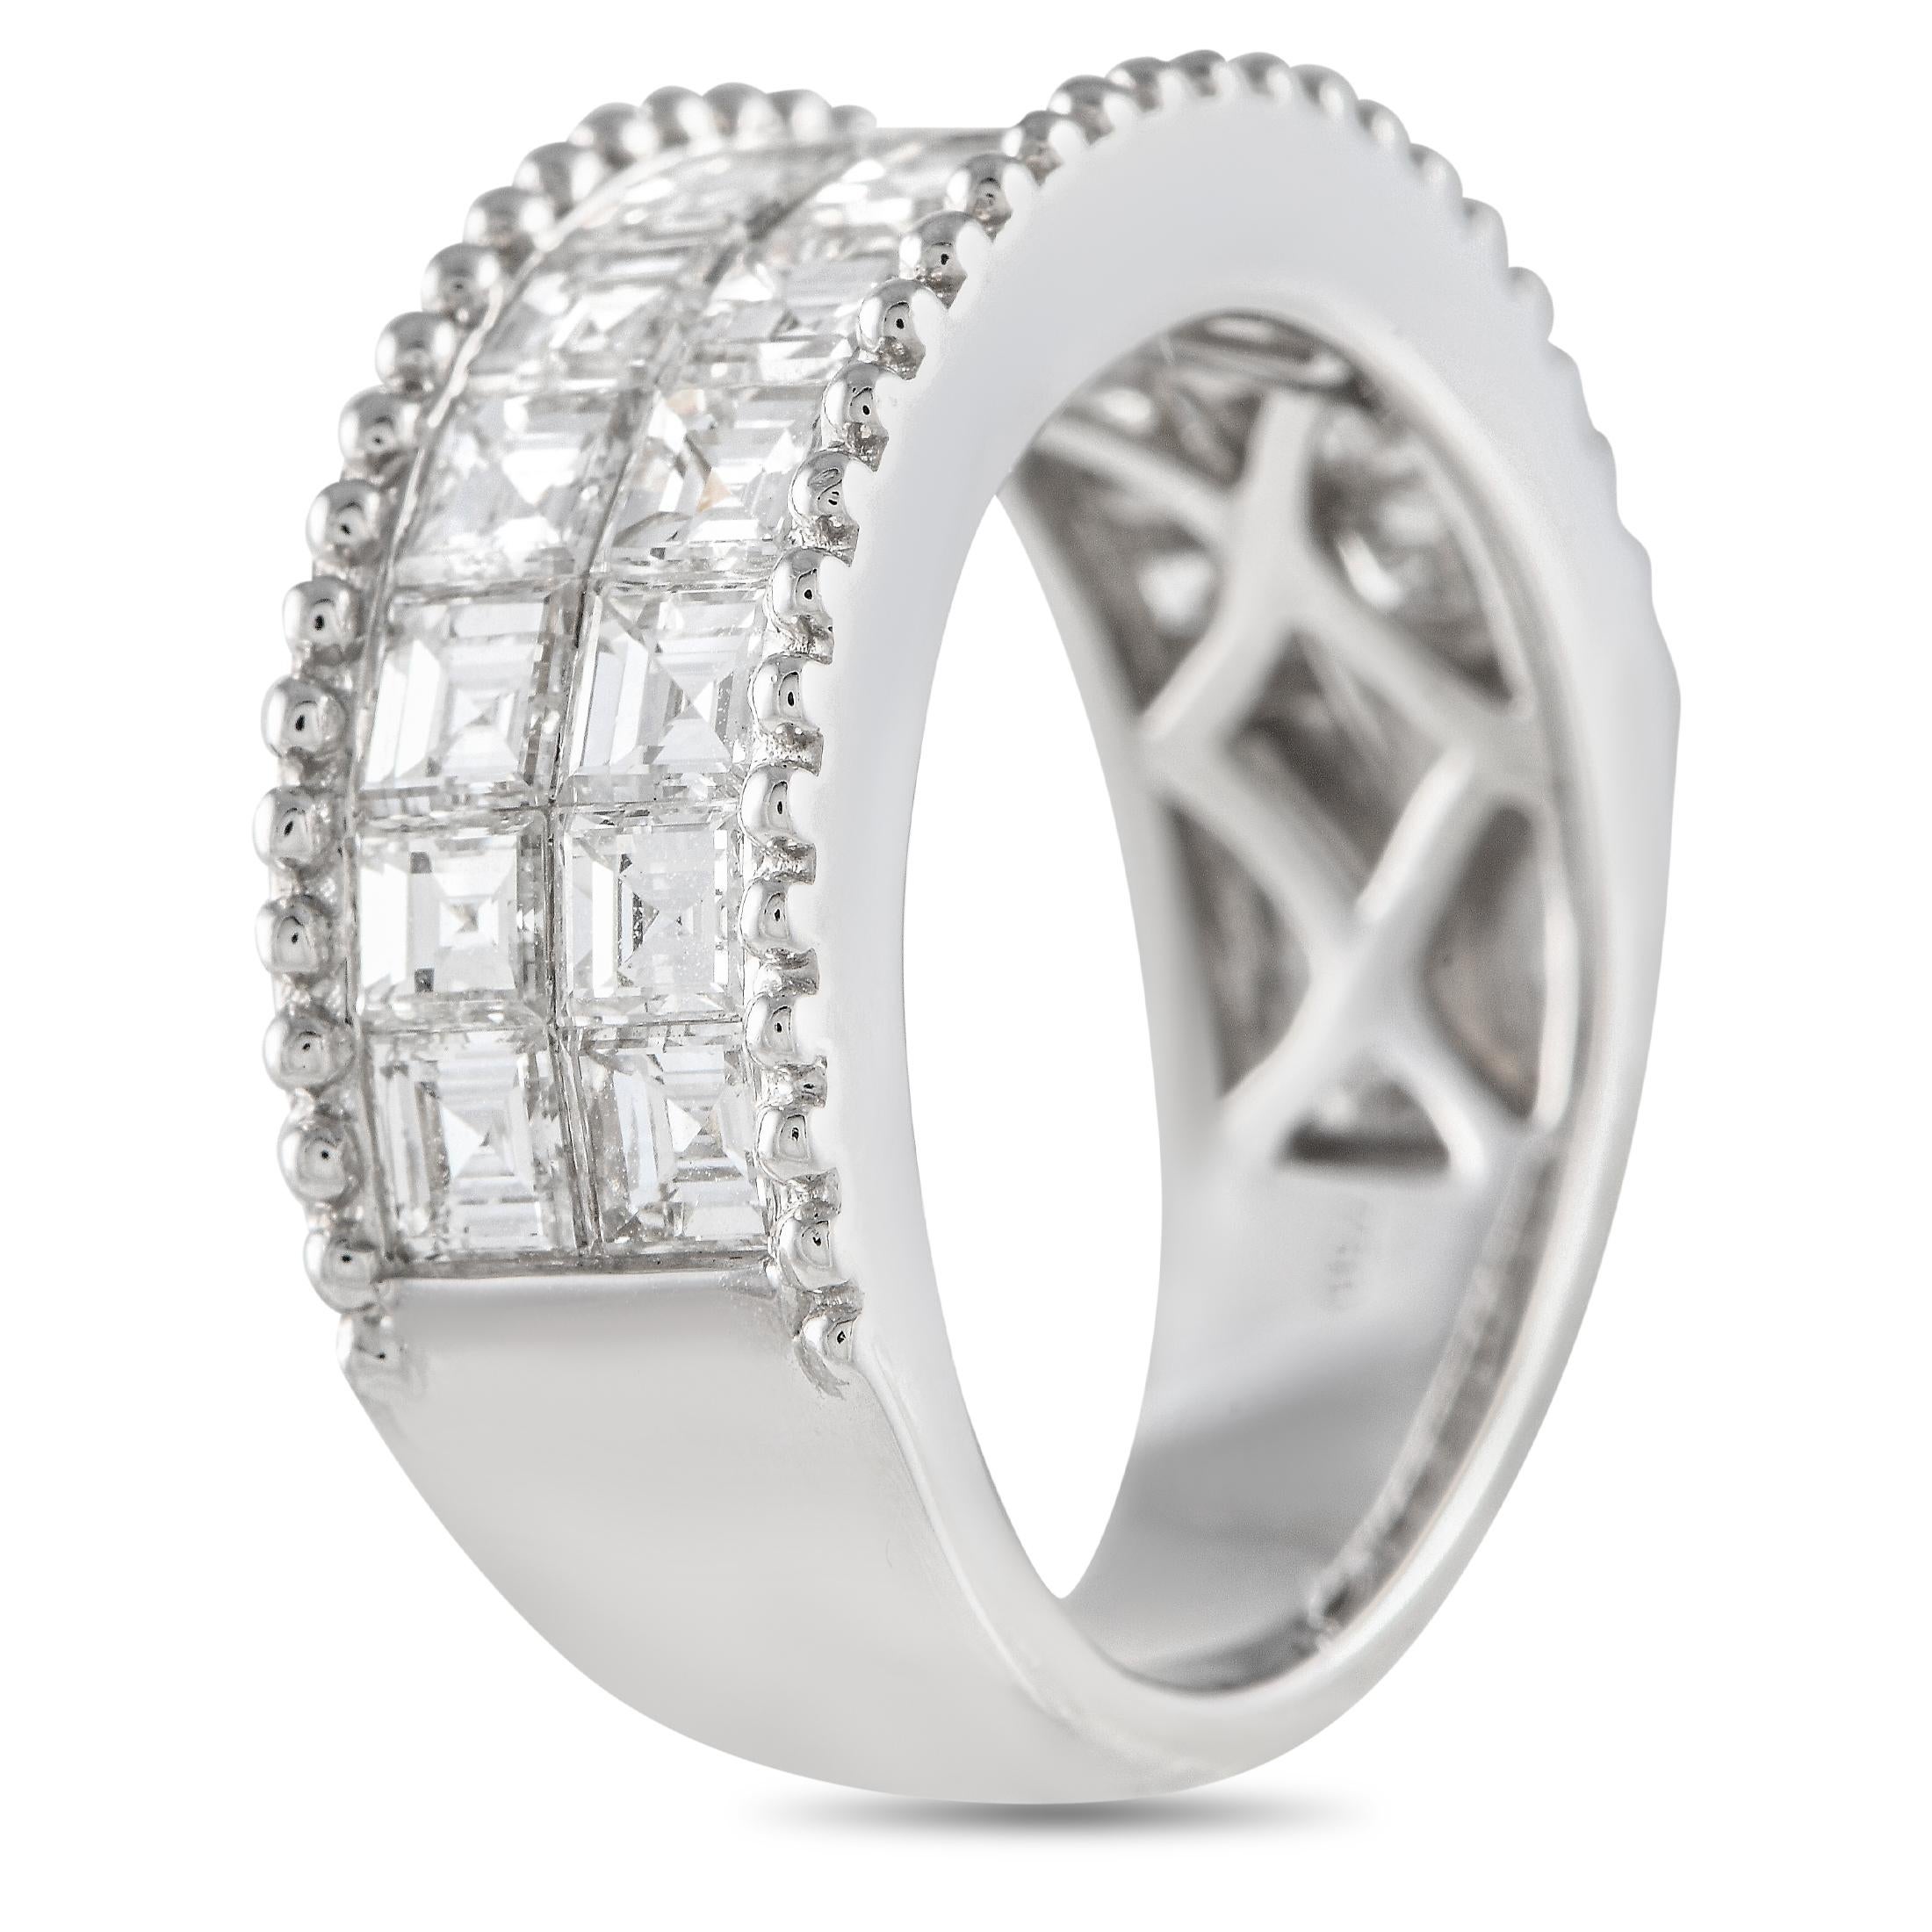 Despite its understated design, this 18K White Gold band ring is filled with dynamic details. Millegrain accents elevate the perimeter, while square-cut diamonds with a total weight of 3.0 carats add a touch of luxury to the center. This timeless